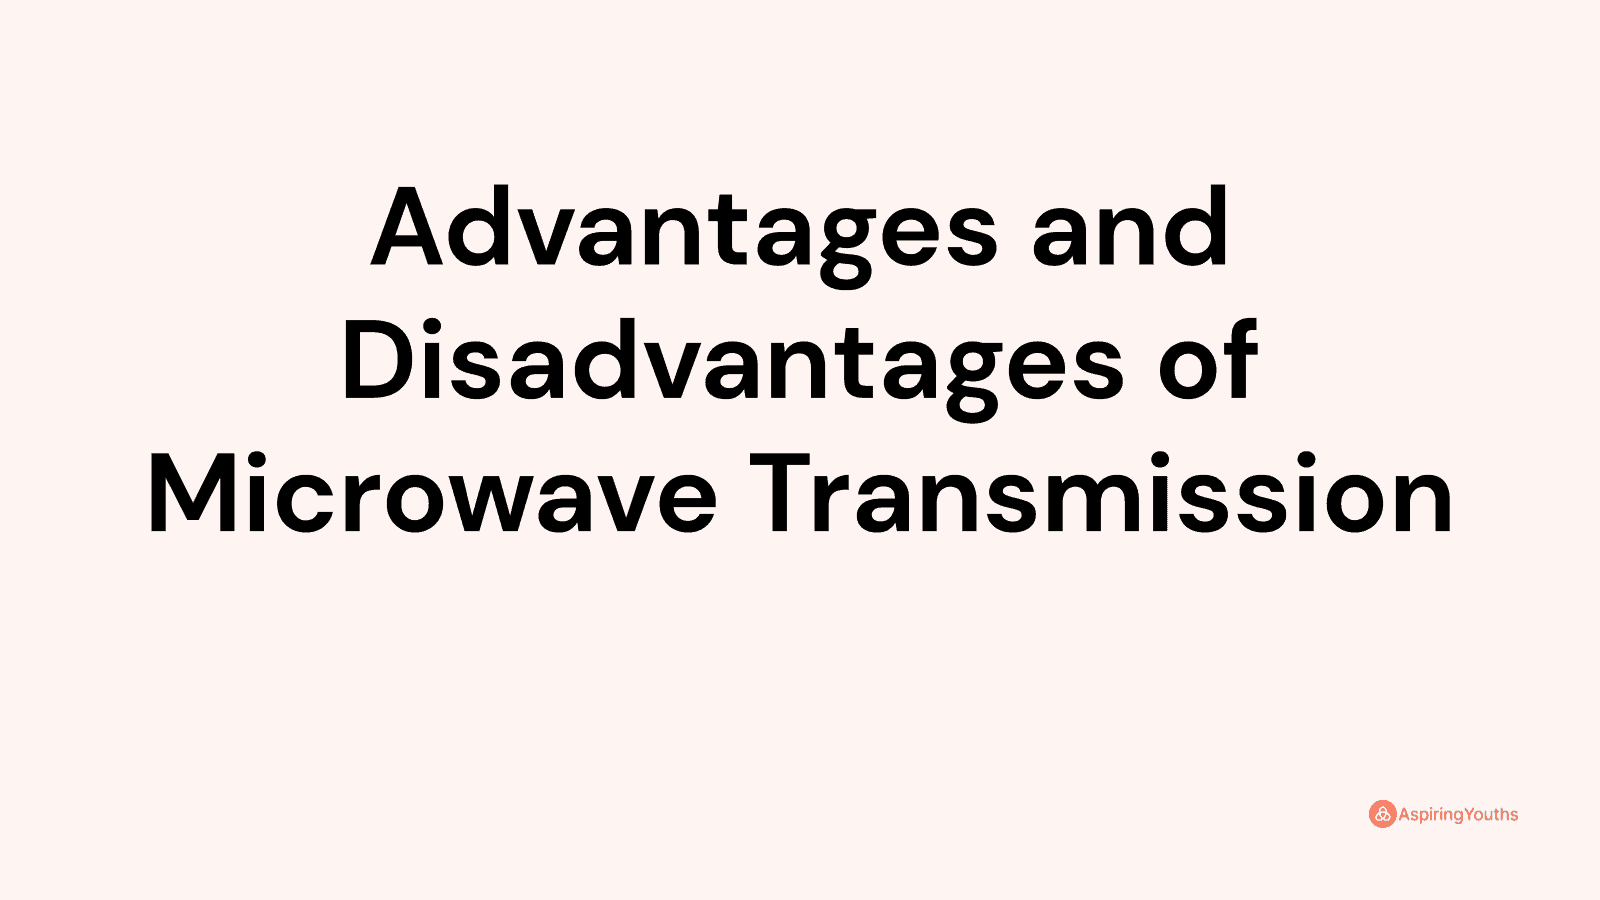 Advantages and disadvantages of Microwave Transmission